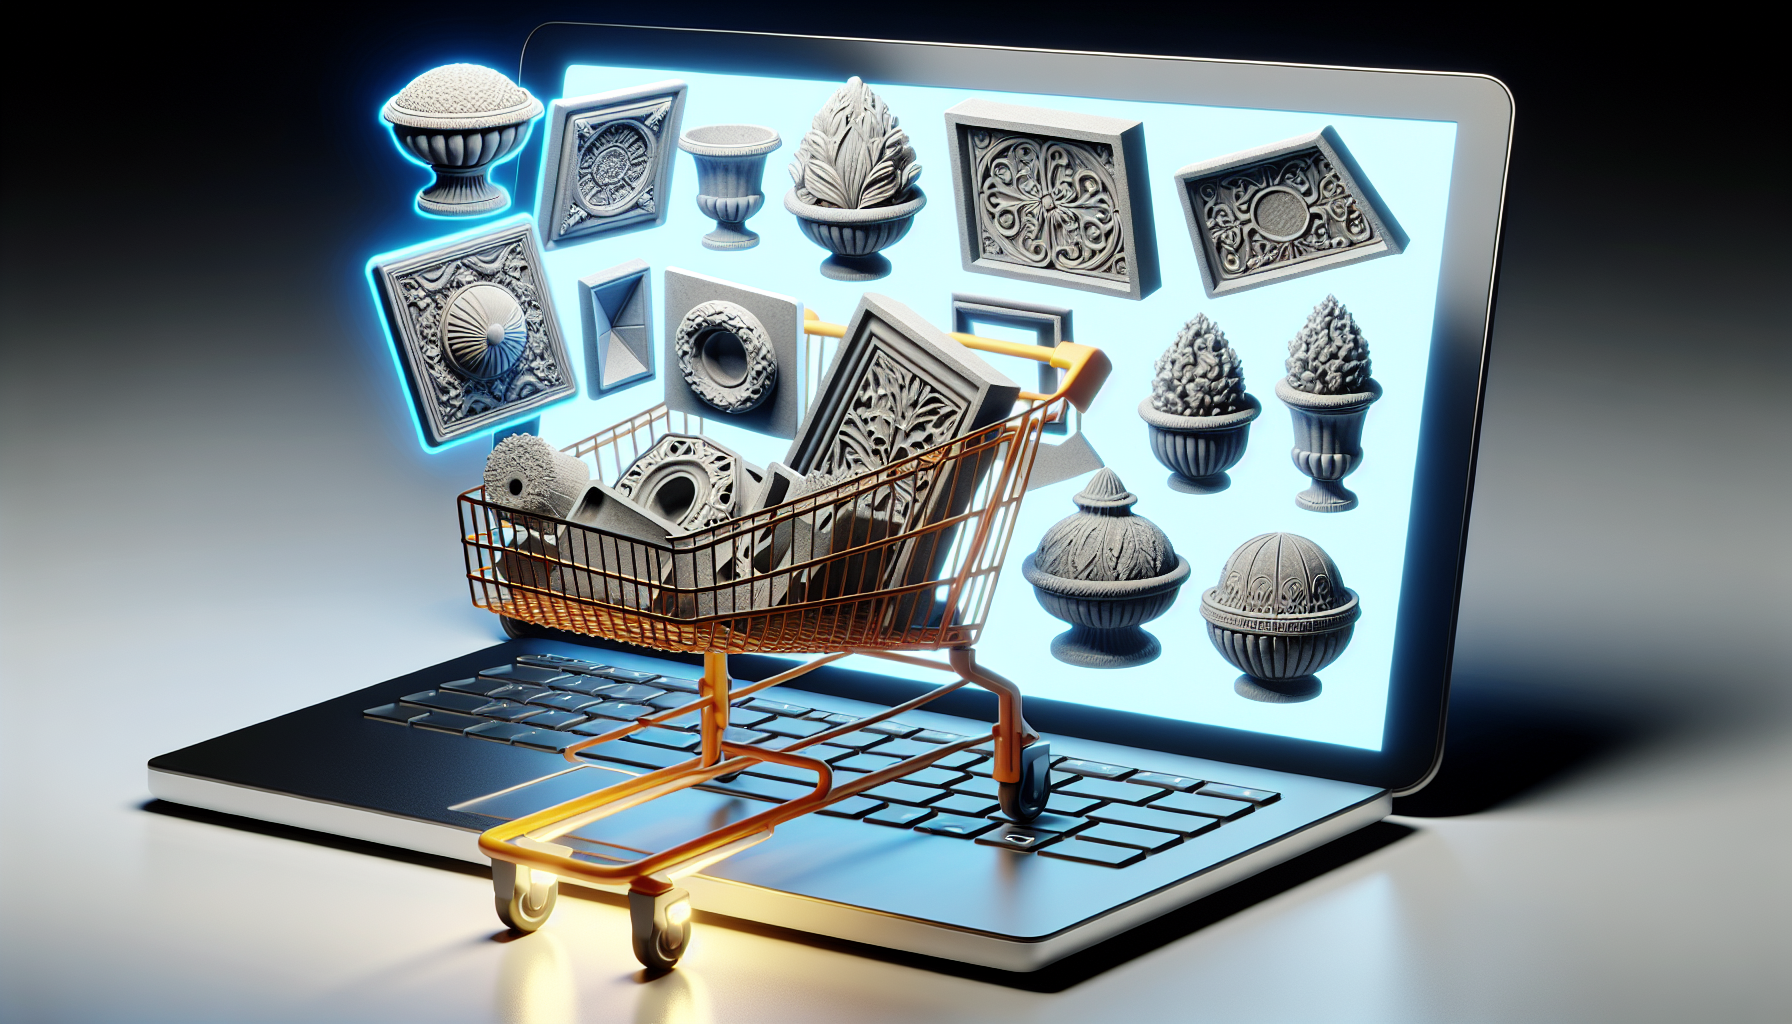 Online shopping cart with plastic molds